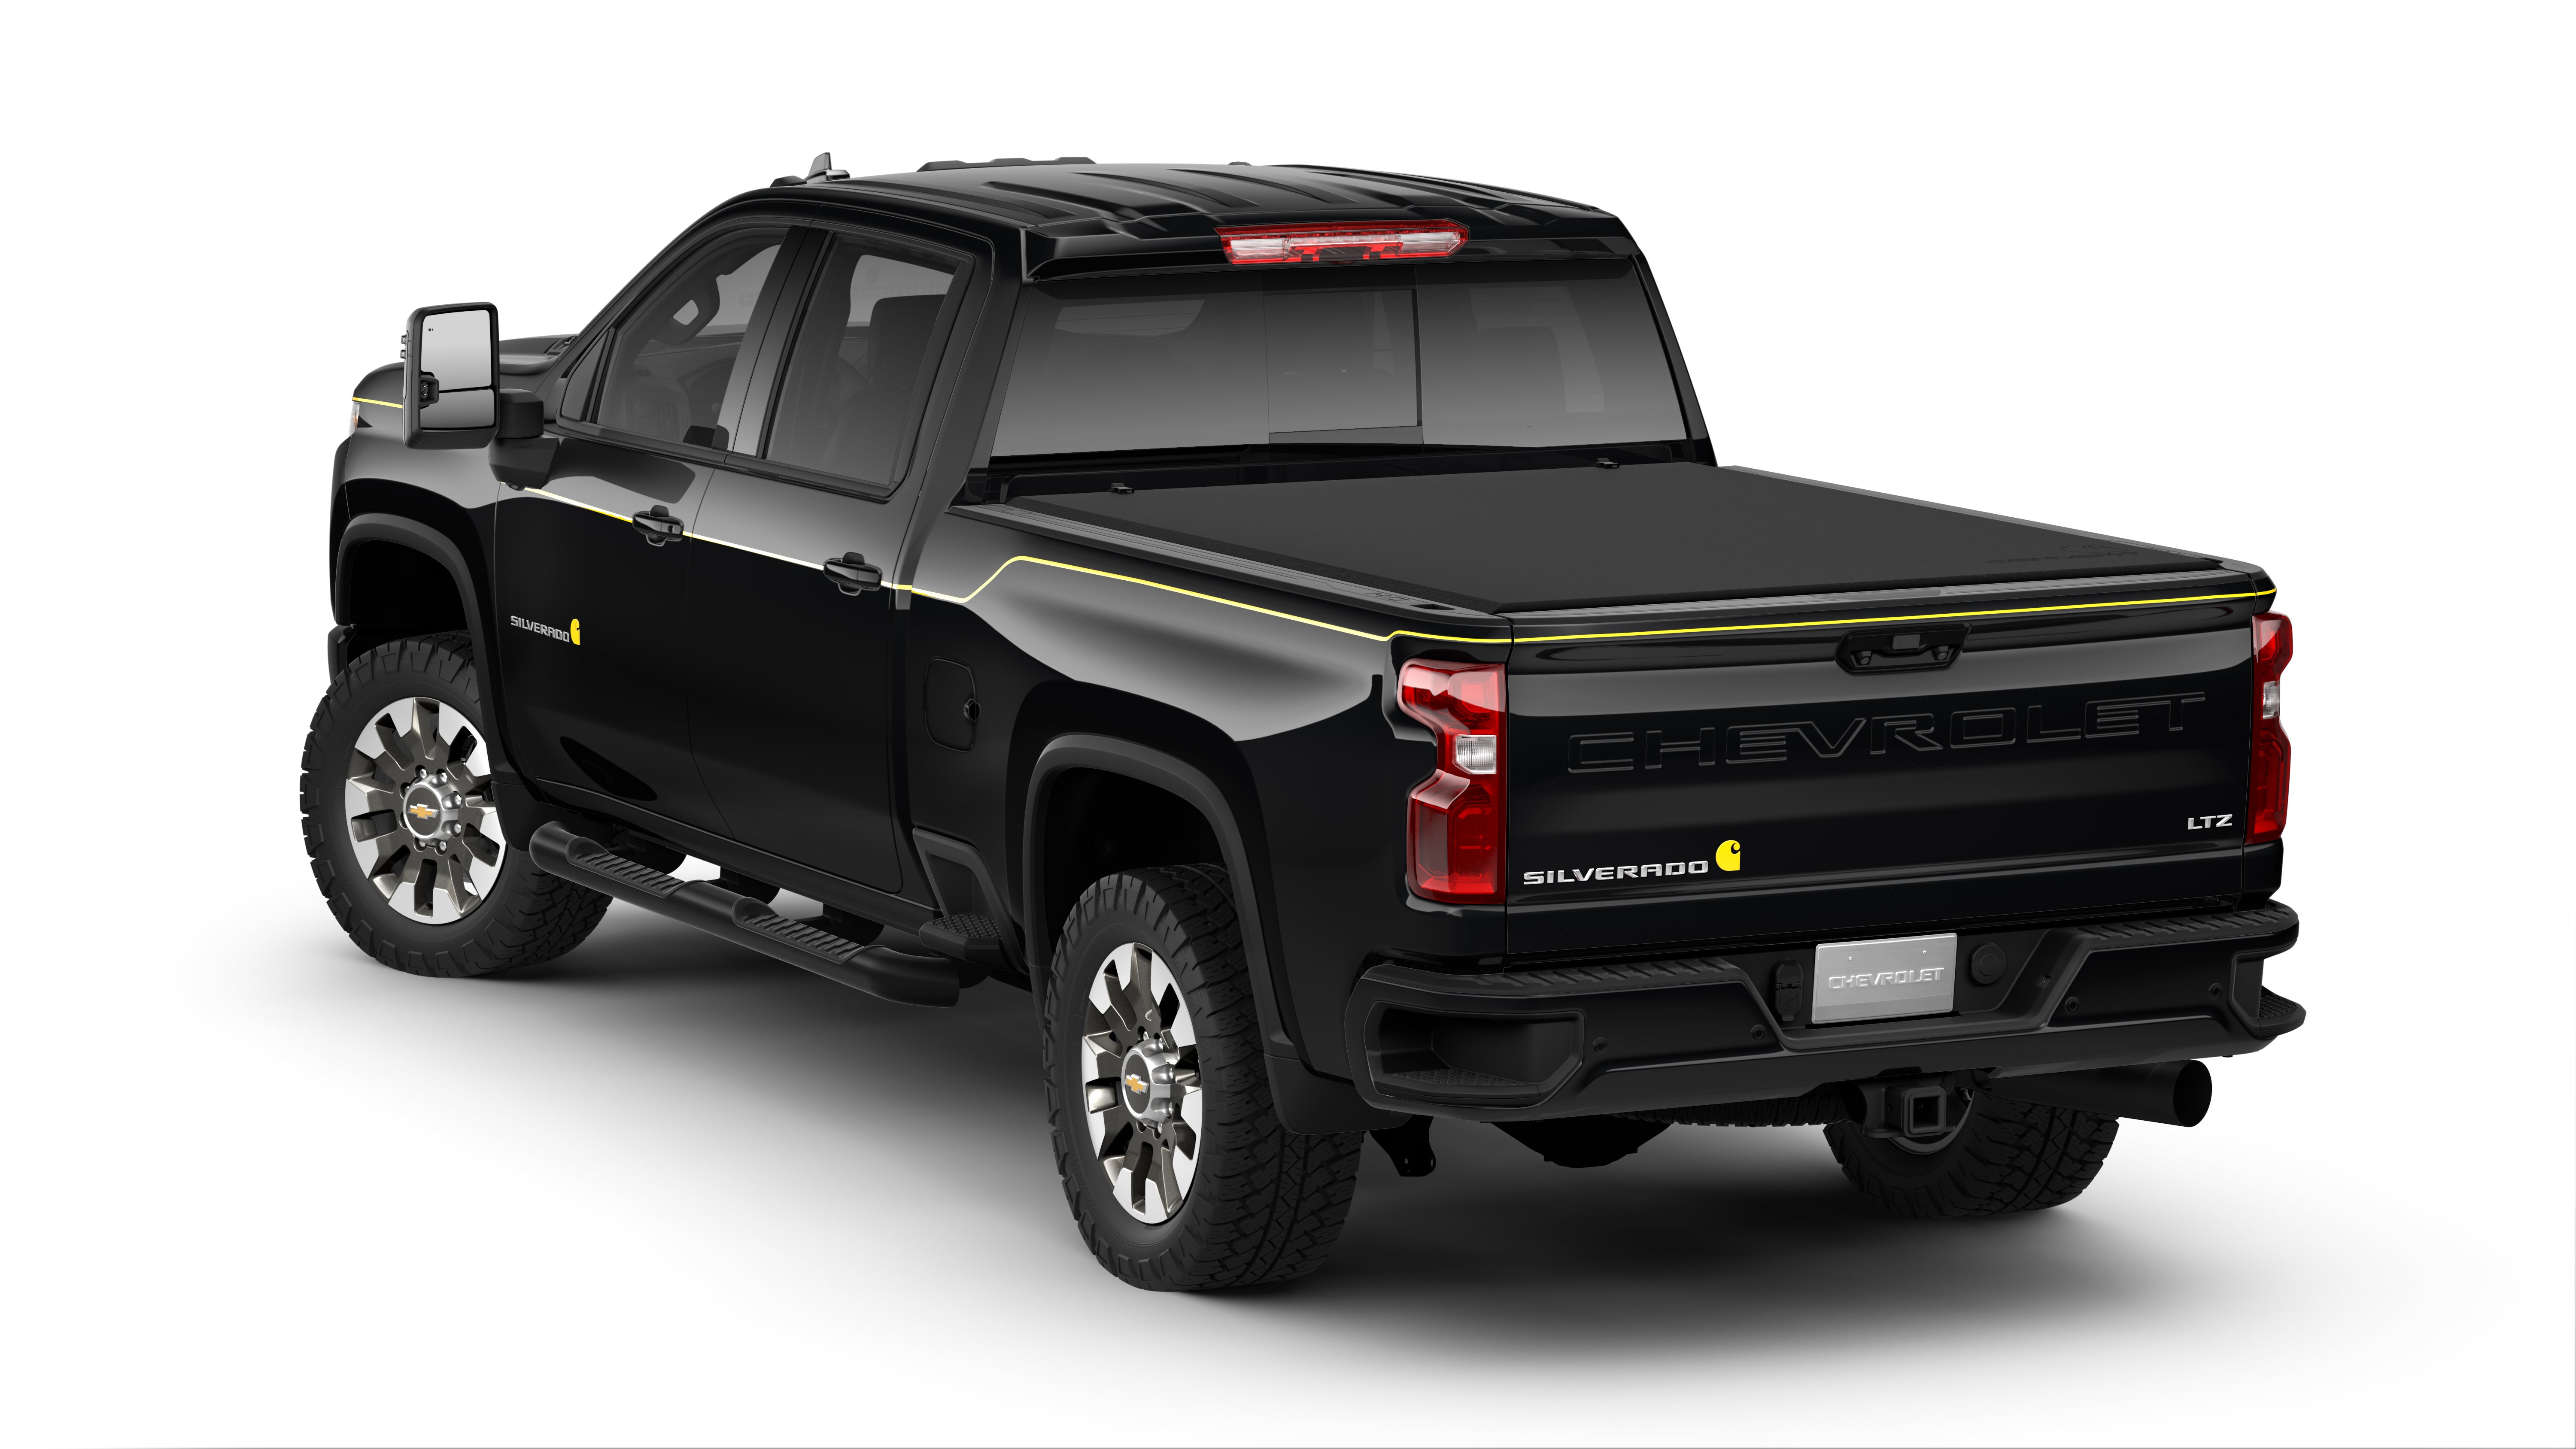 If you just want to play work truck instead of getting the 36,000-lb-hauling work truck, there